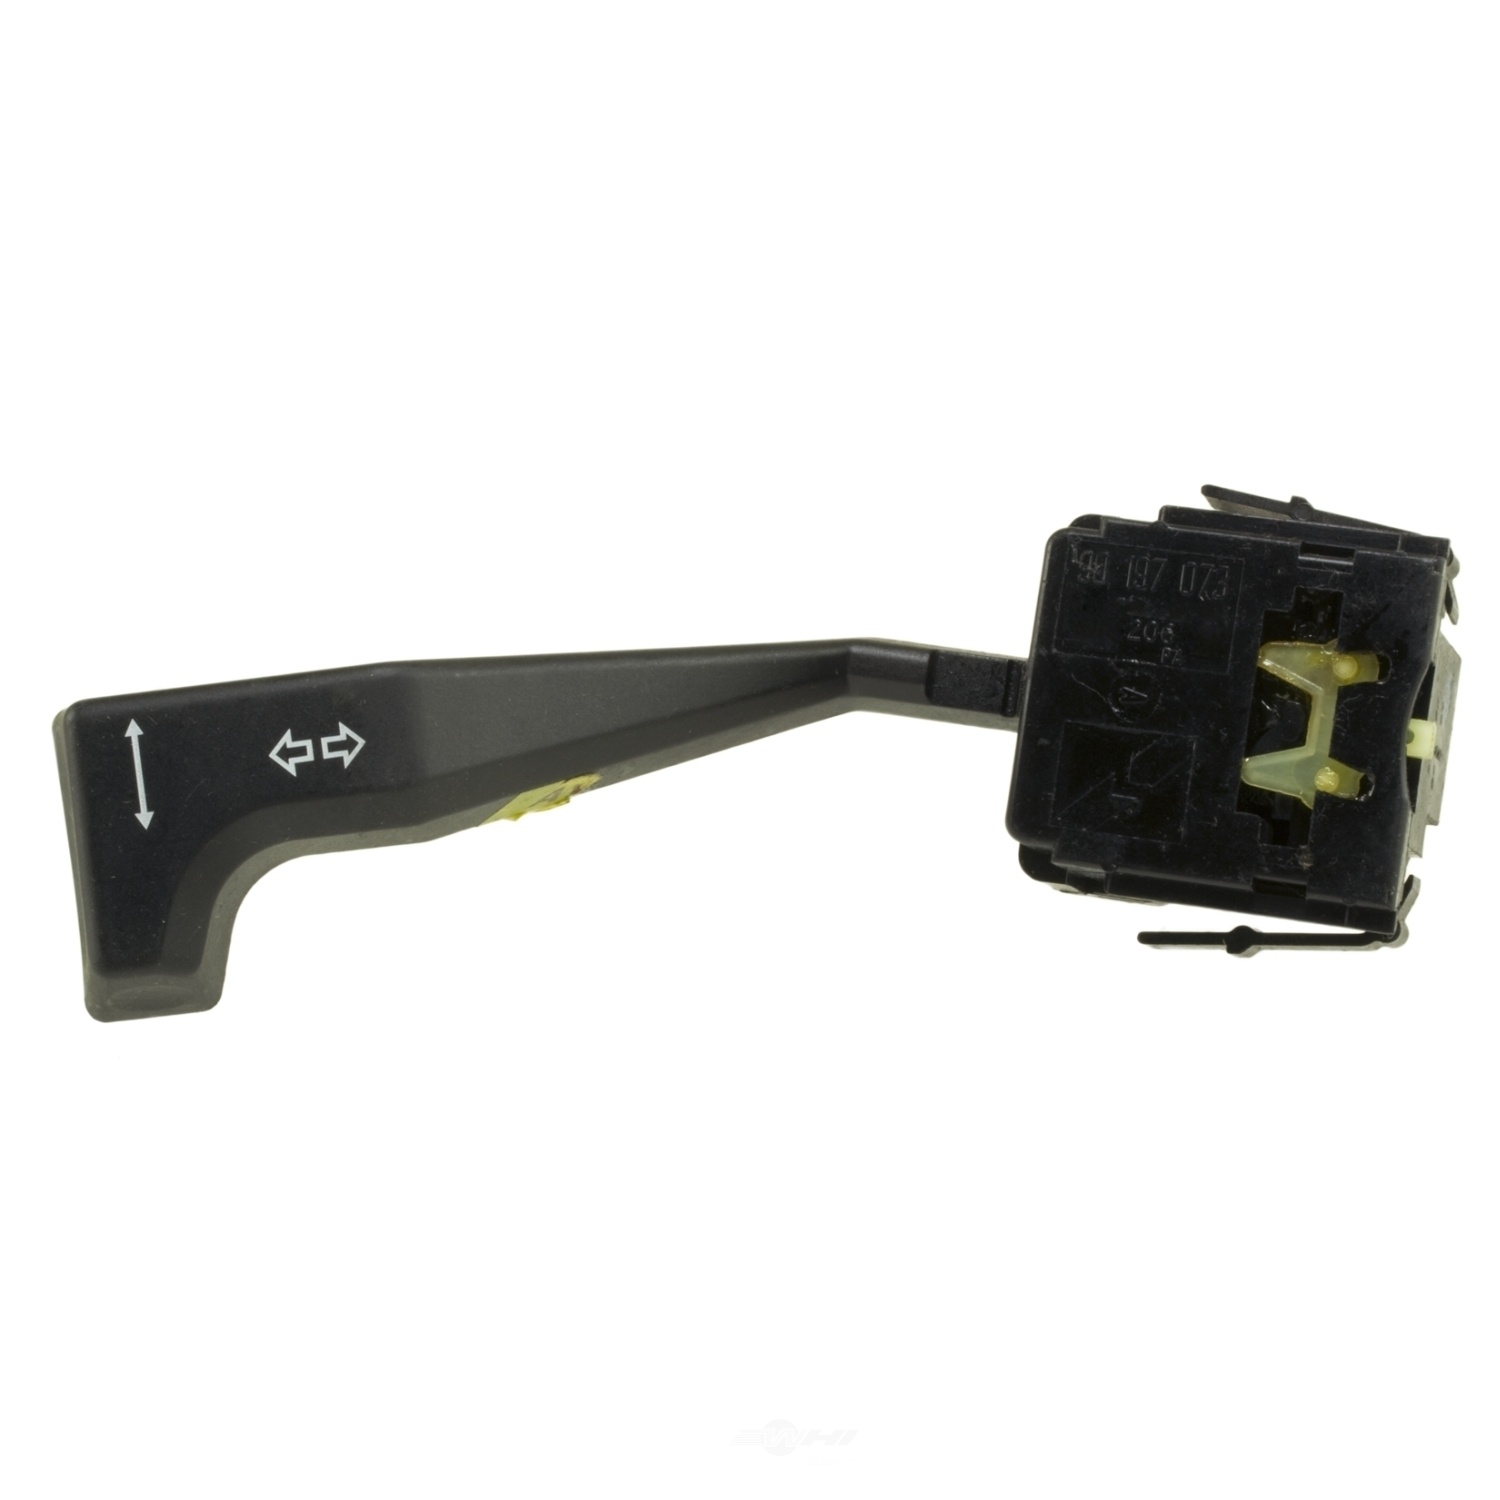 GM GENUINE PARTS - Headlight Dimmer Switch - GMP D6214C